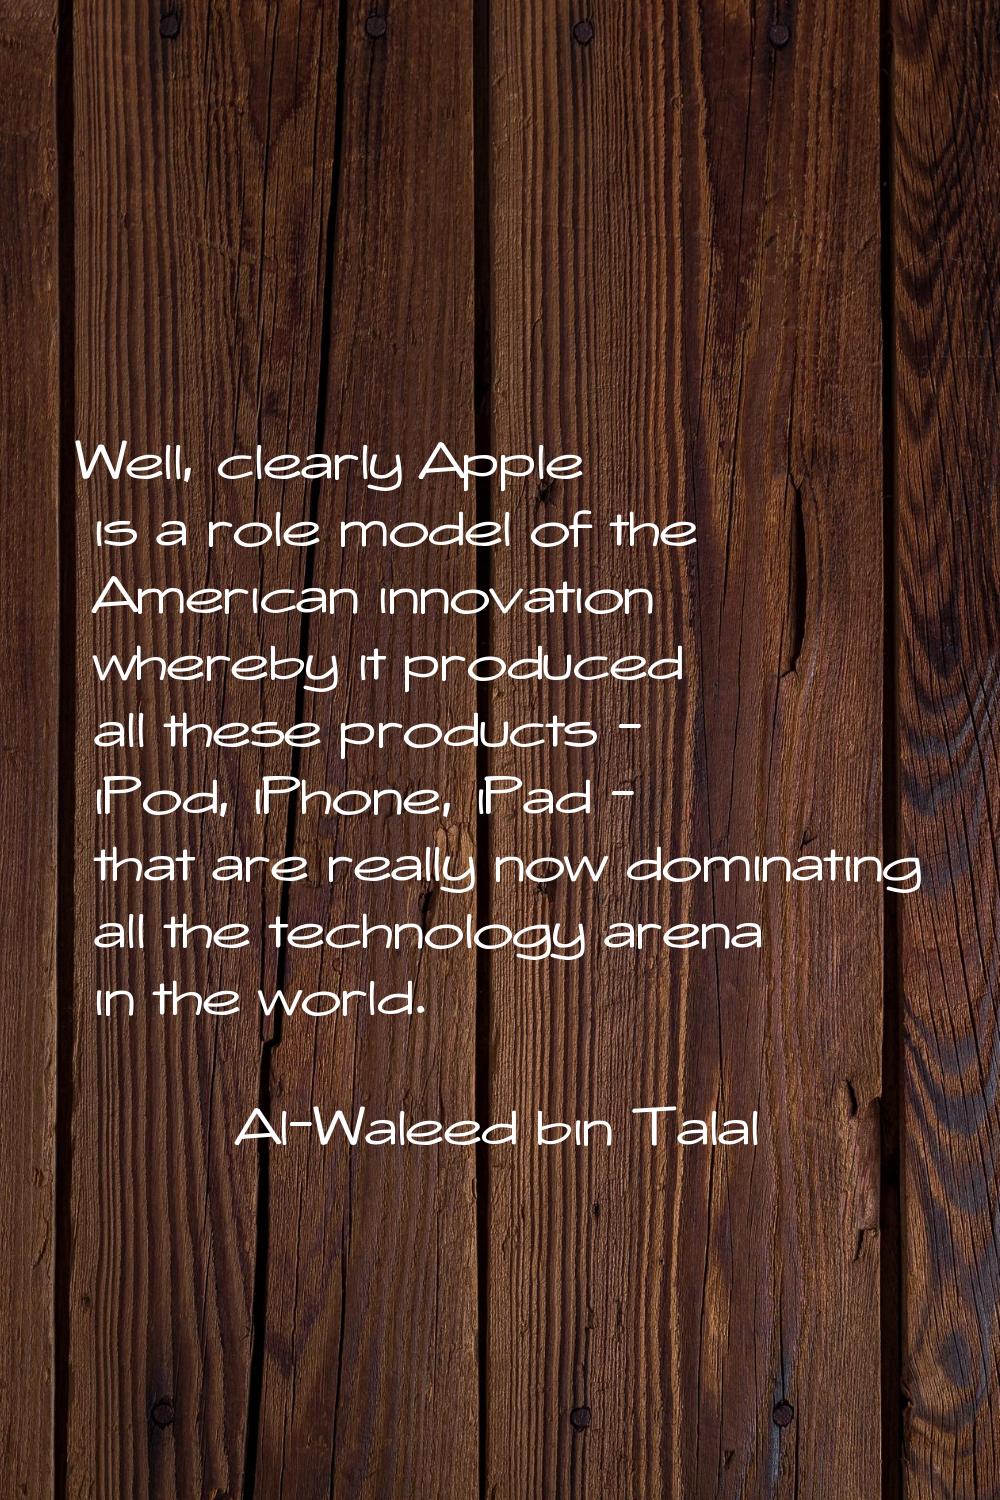 Well, clearly Apple is a role model of the American innovation whereby it produced all these produc